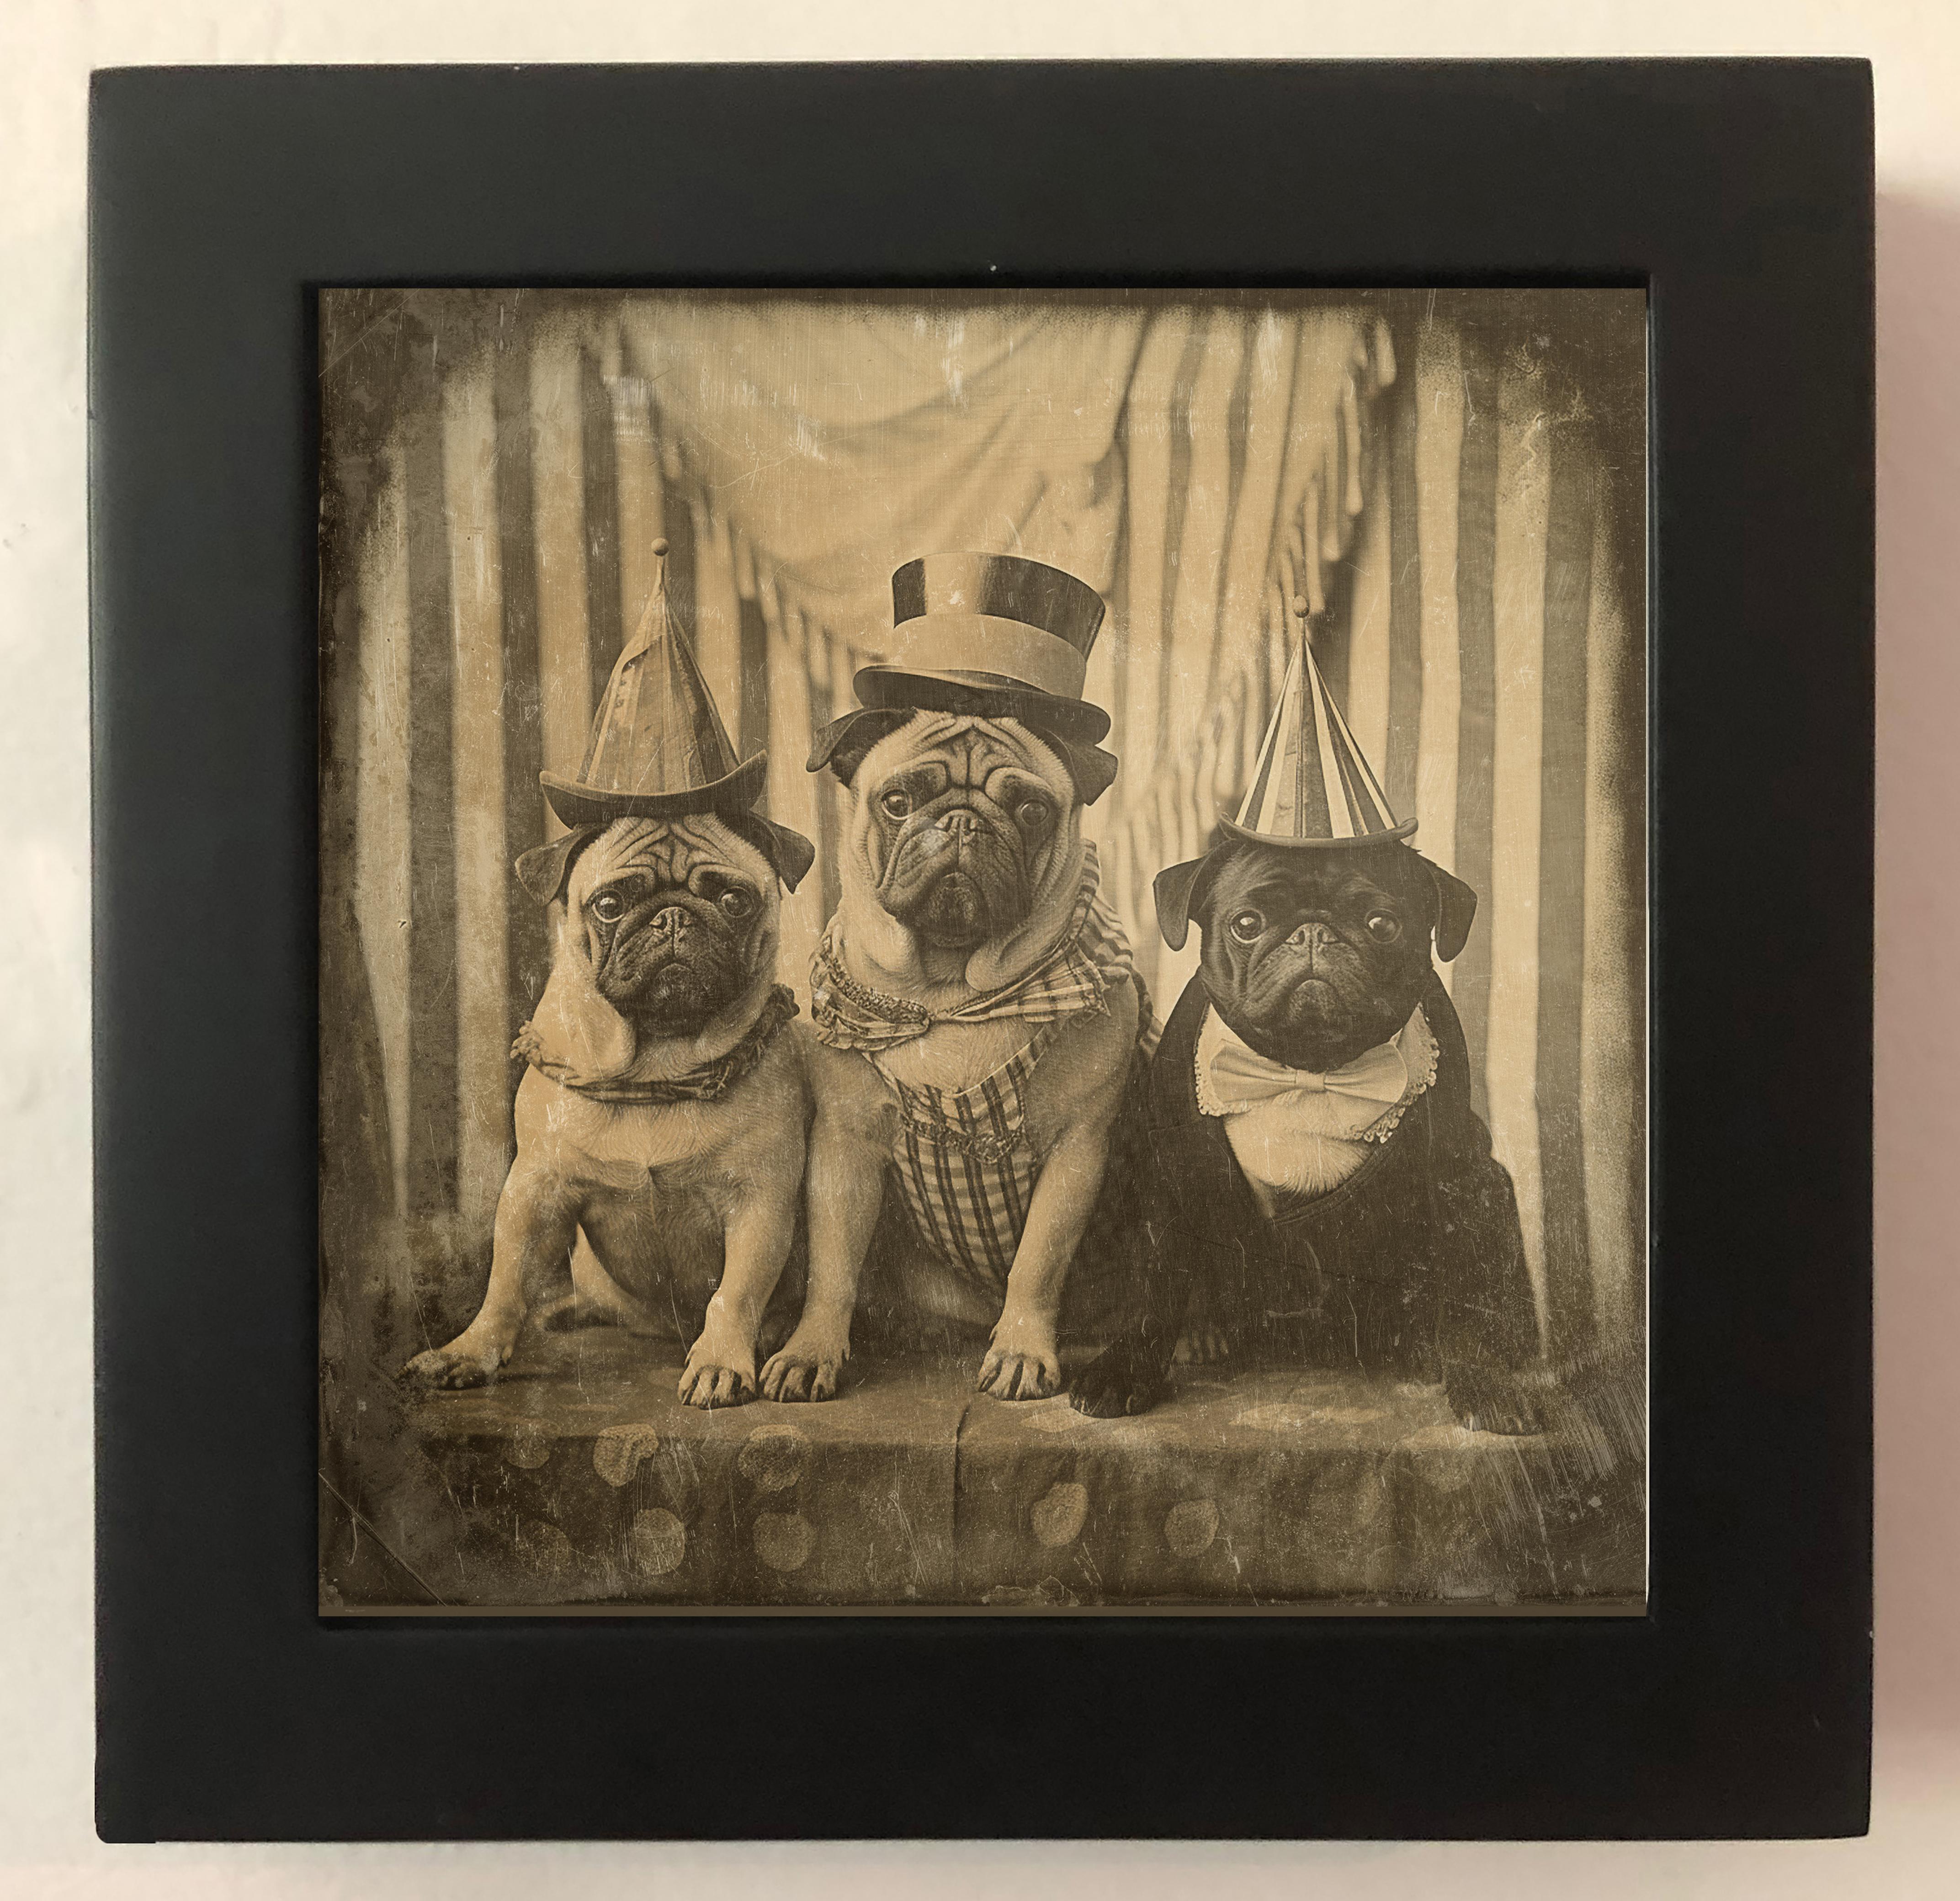 Three Circus Pugs - enchanting exotic daguerreotype reproduction Framed - Photograph by FPA Francis Pavy Artist